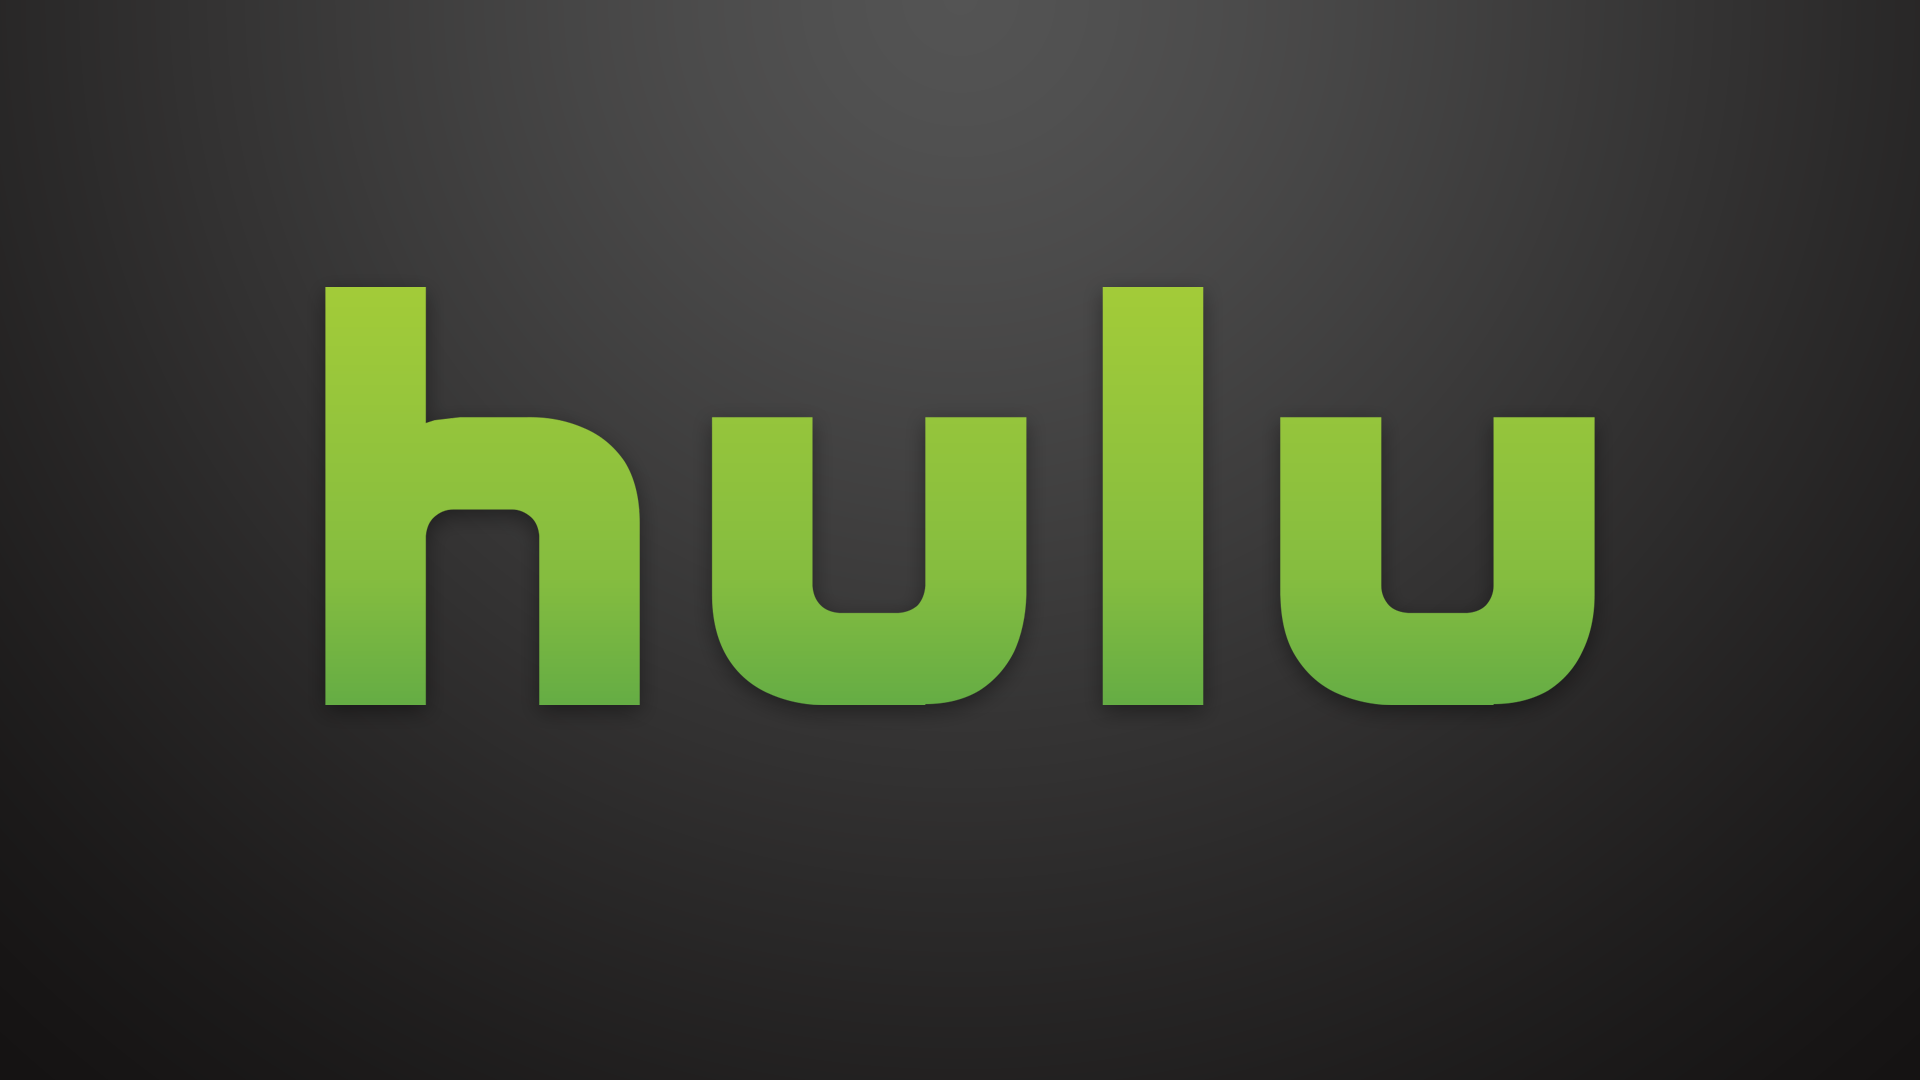 Hulu Announces a Price Drop for its Basic Package